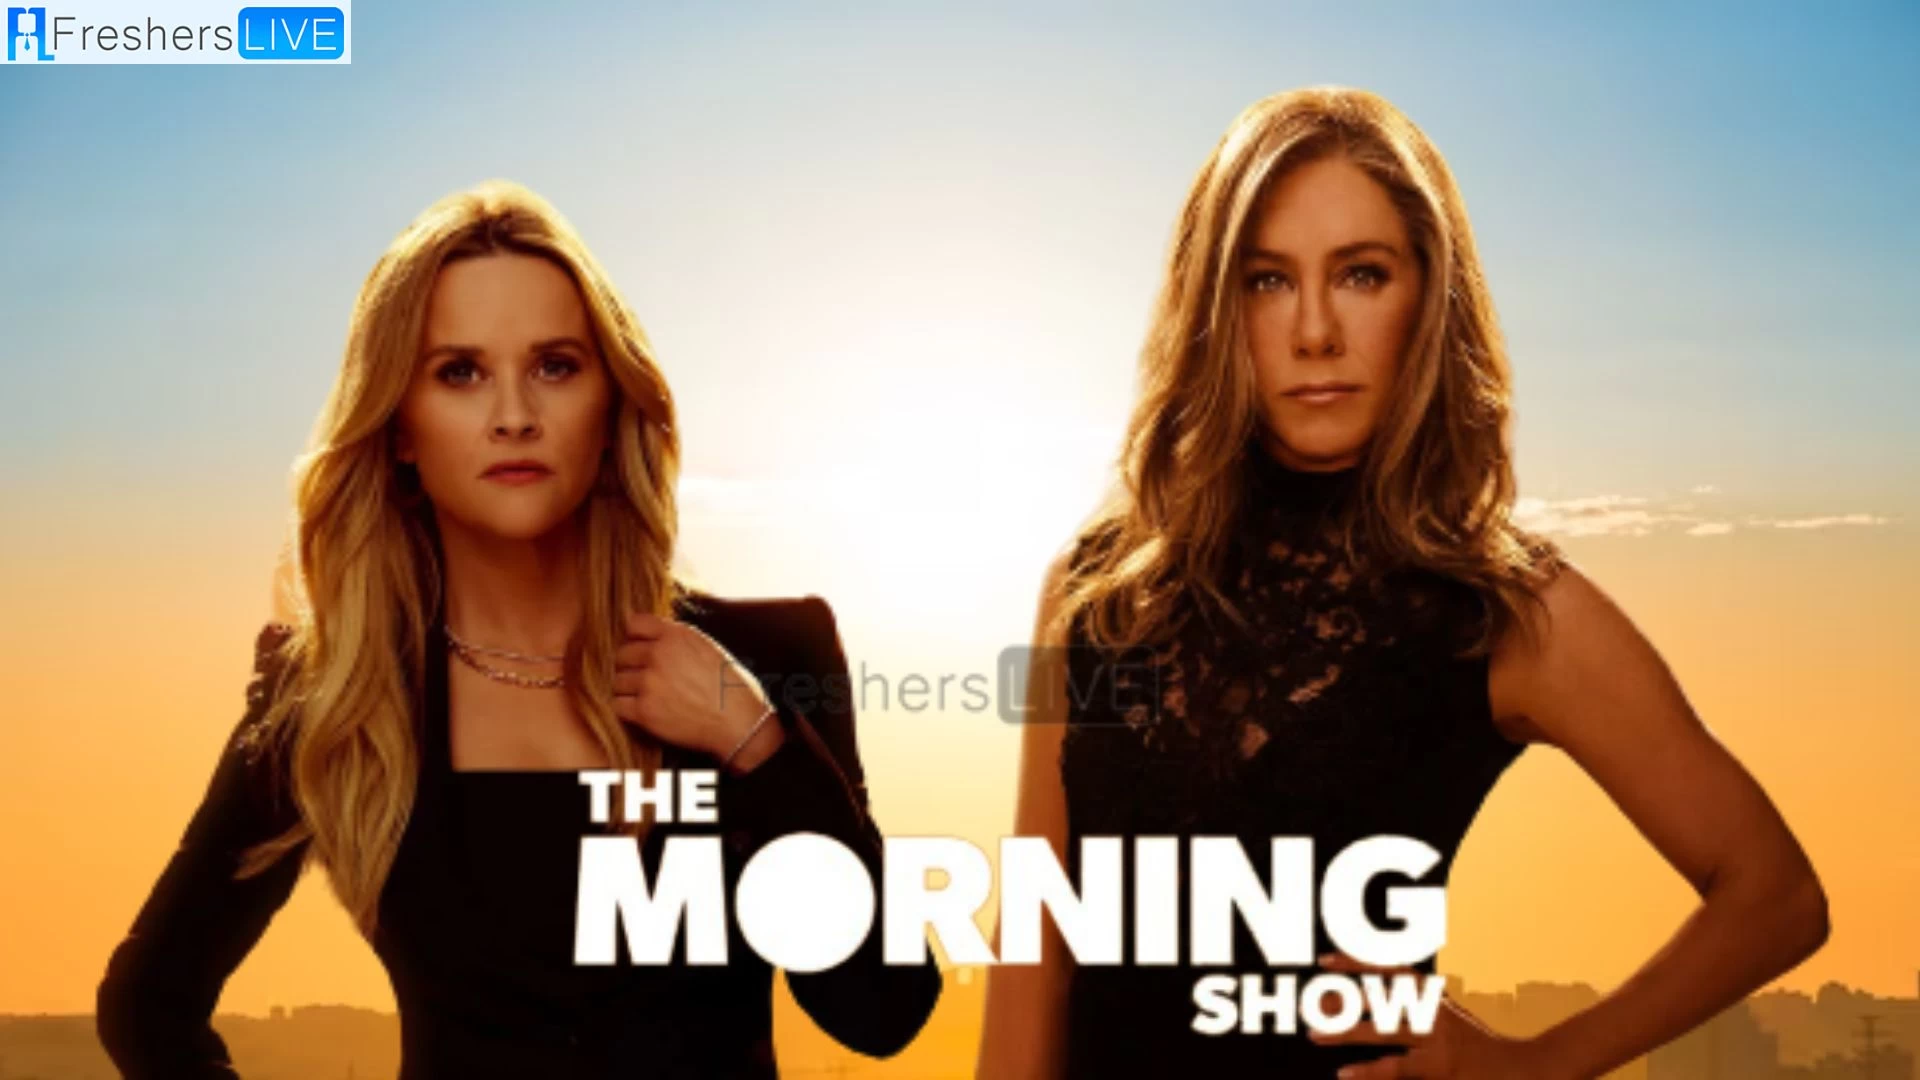 The Morning Show Season 3 Episode 5 Ending Explained, Release Date, Cast, Plot, Review, Summary, Where to Watch and More